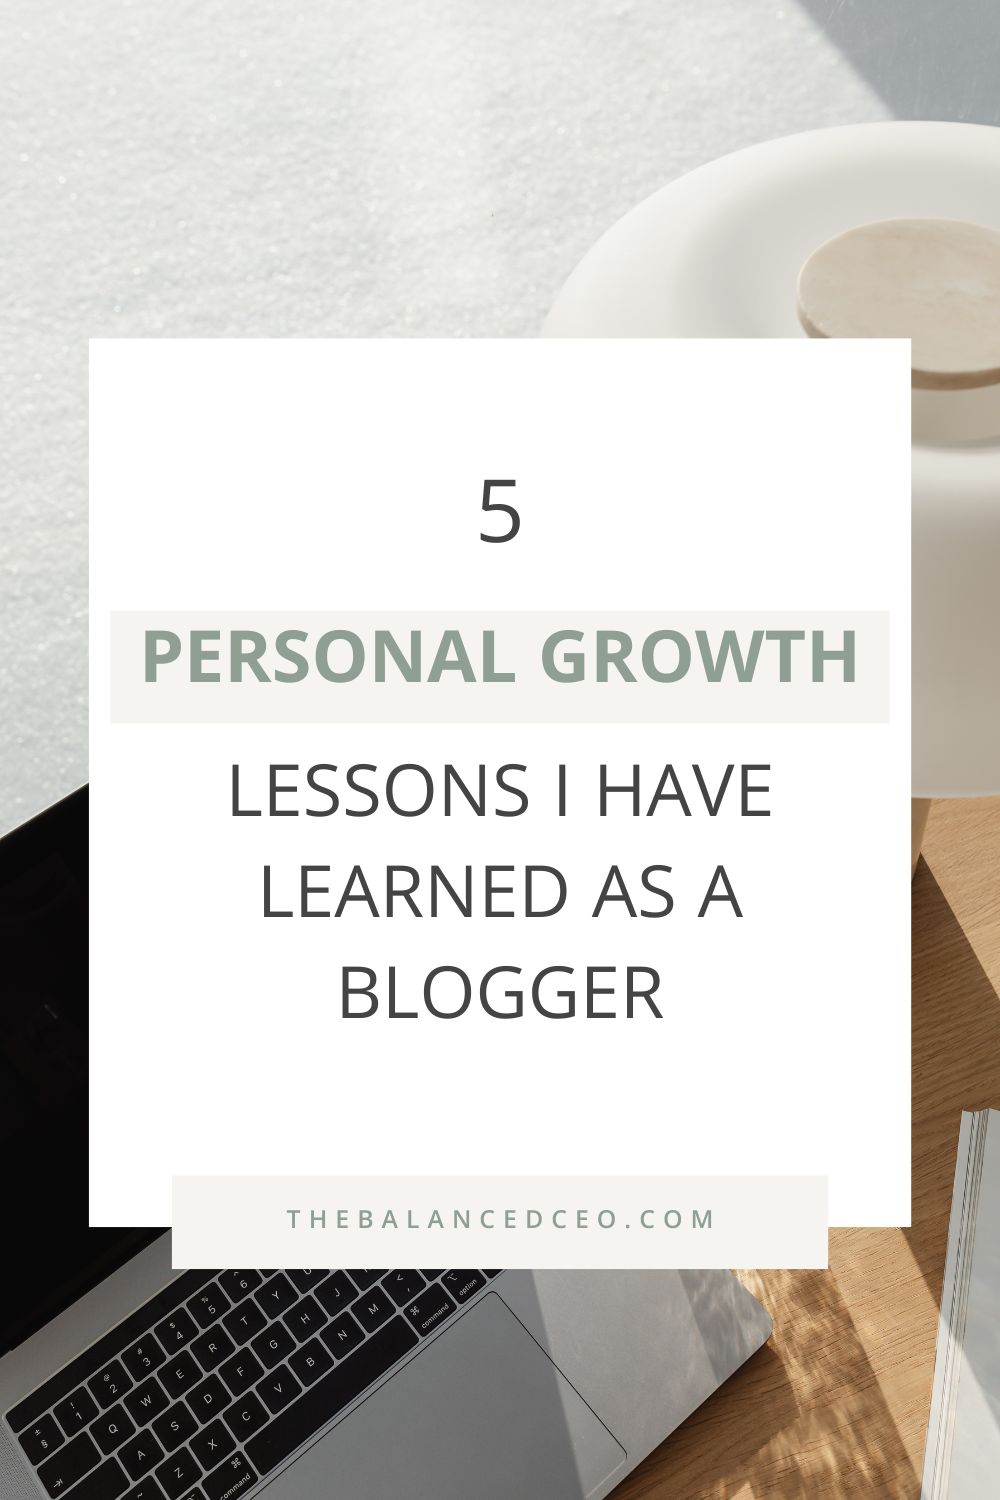 My Personal Growth Journey as a Blogger